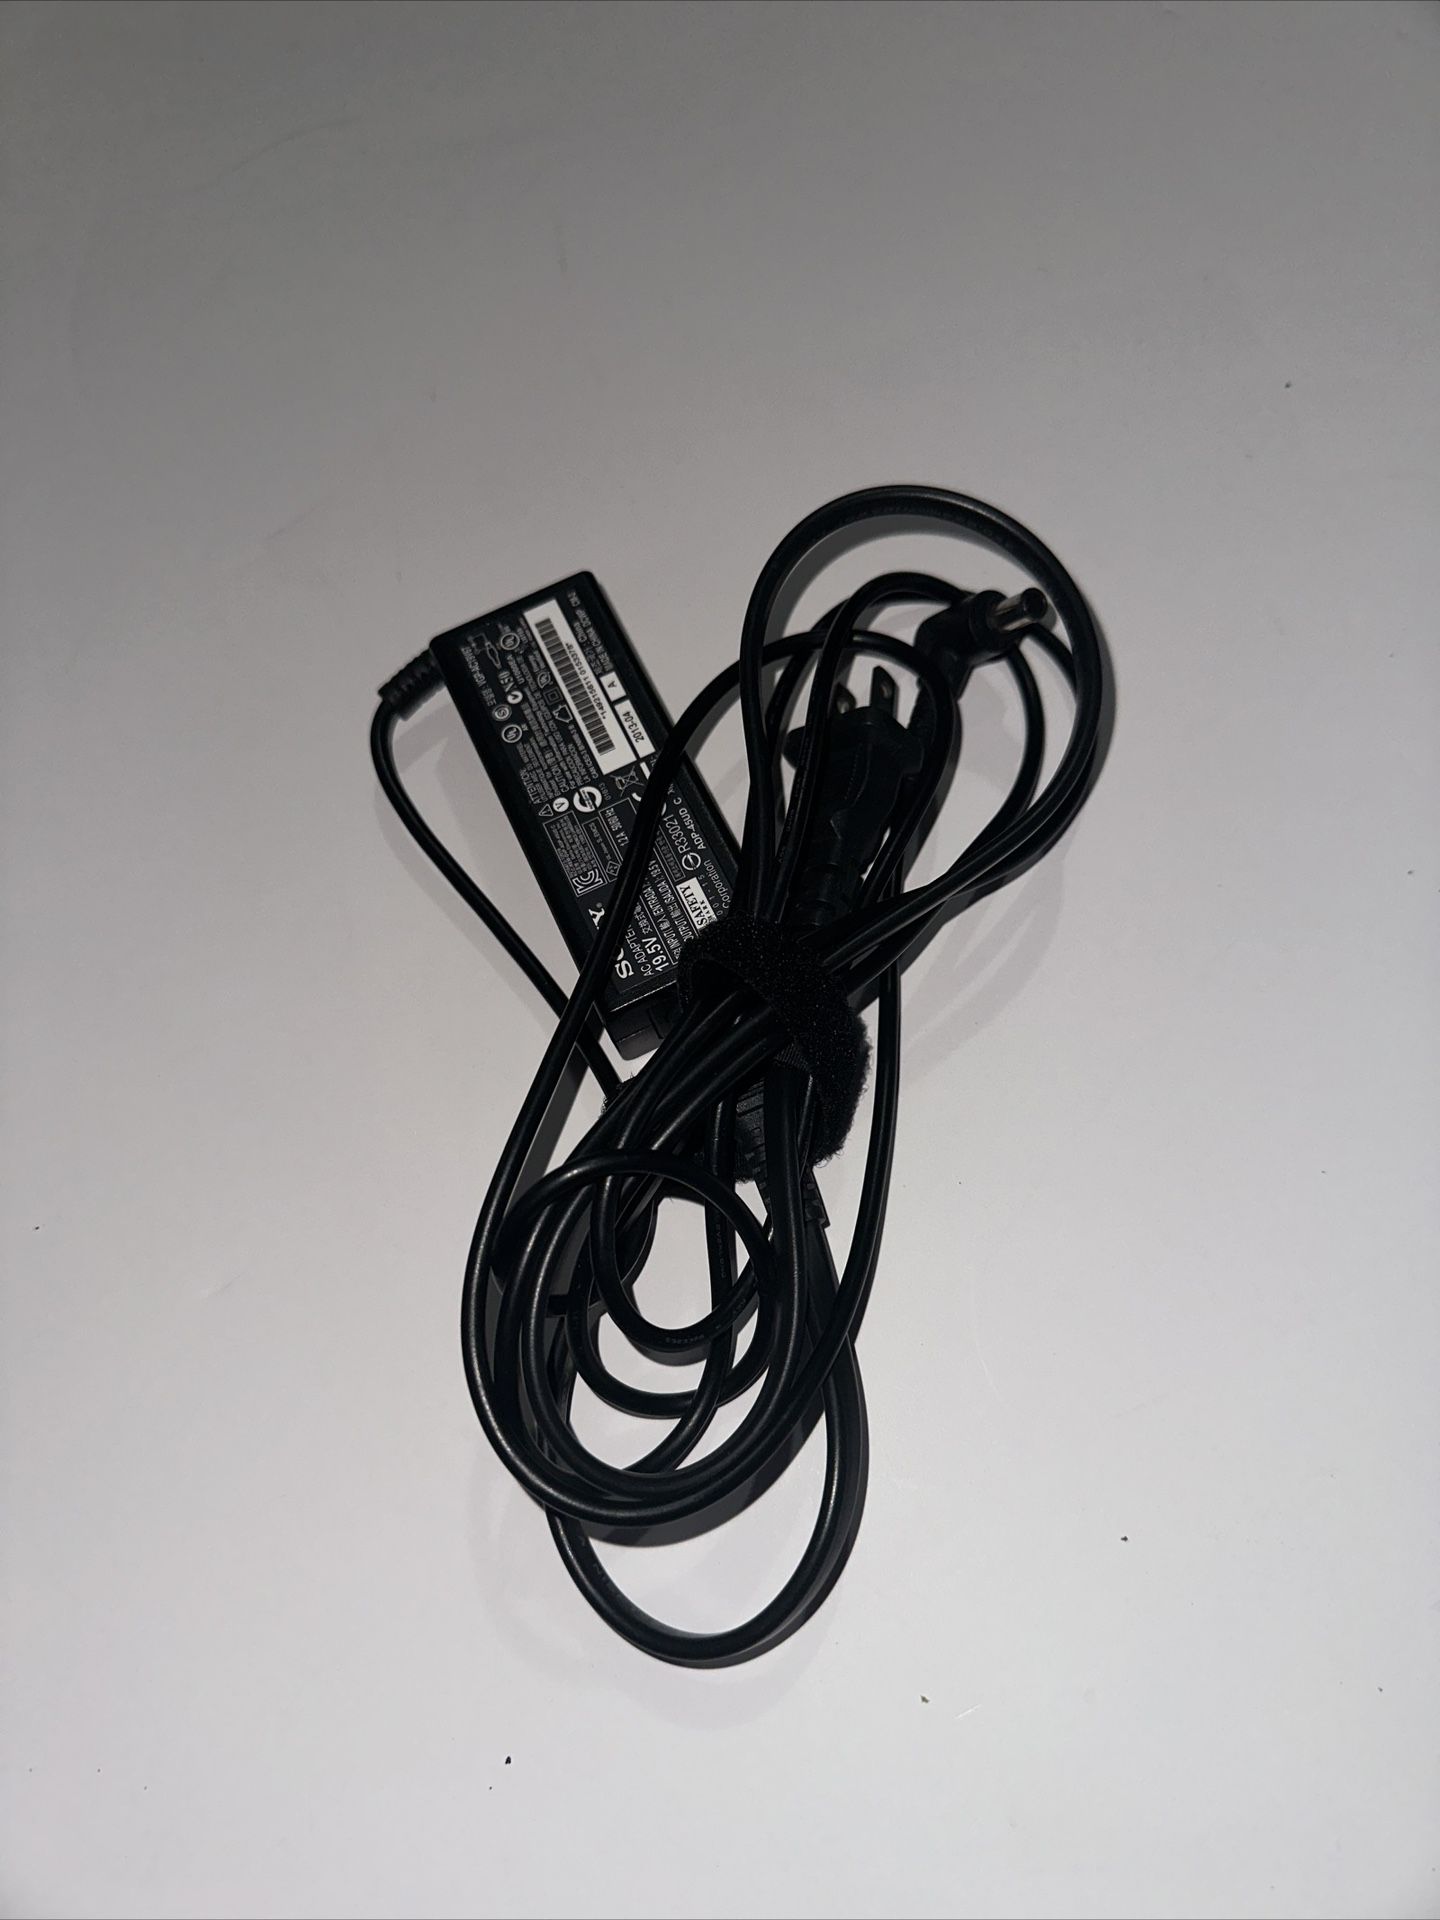 Genuine Sony Vaio Laptop Charger AC Power Adapter VGP-AC19V67 ADP-45UD C 45W